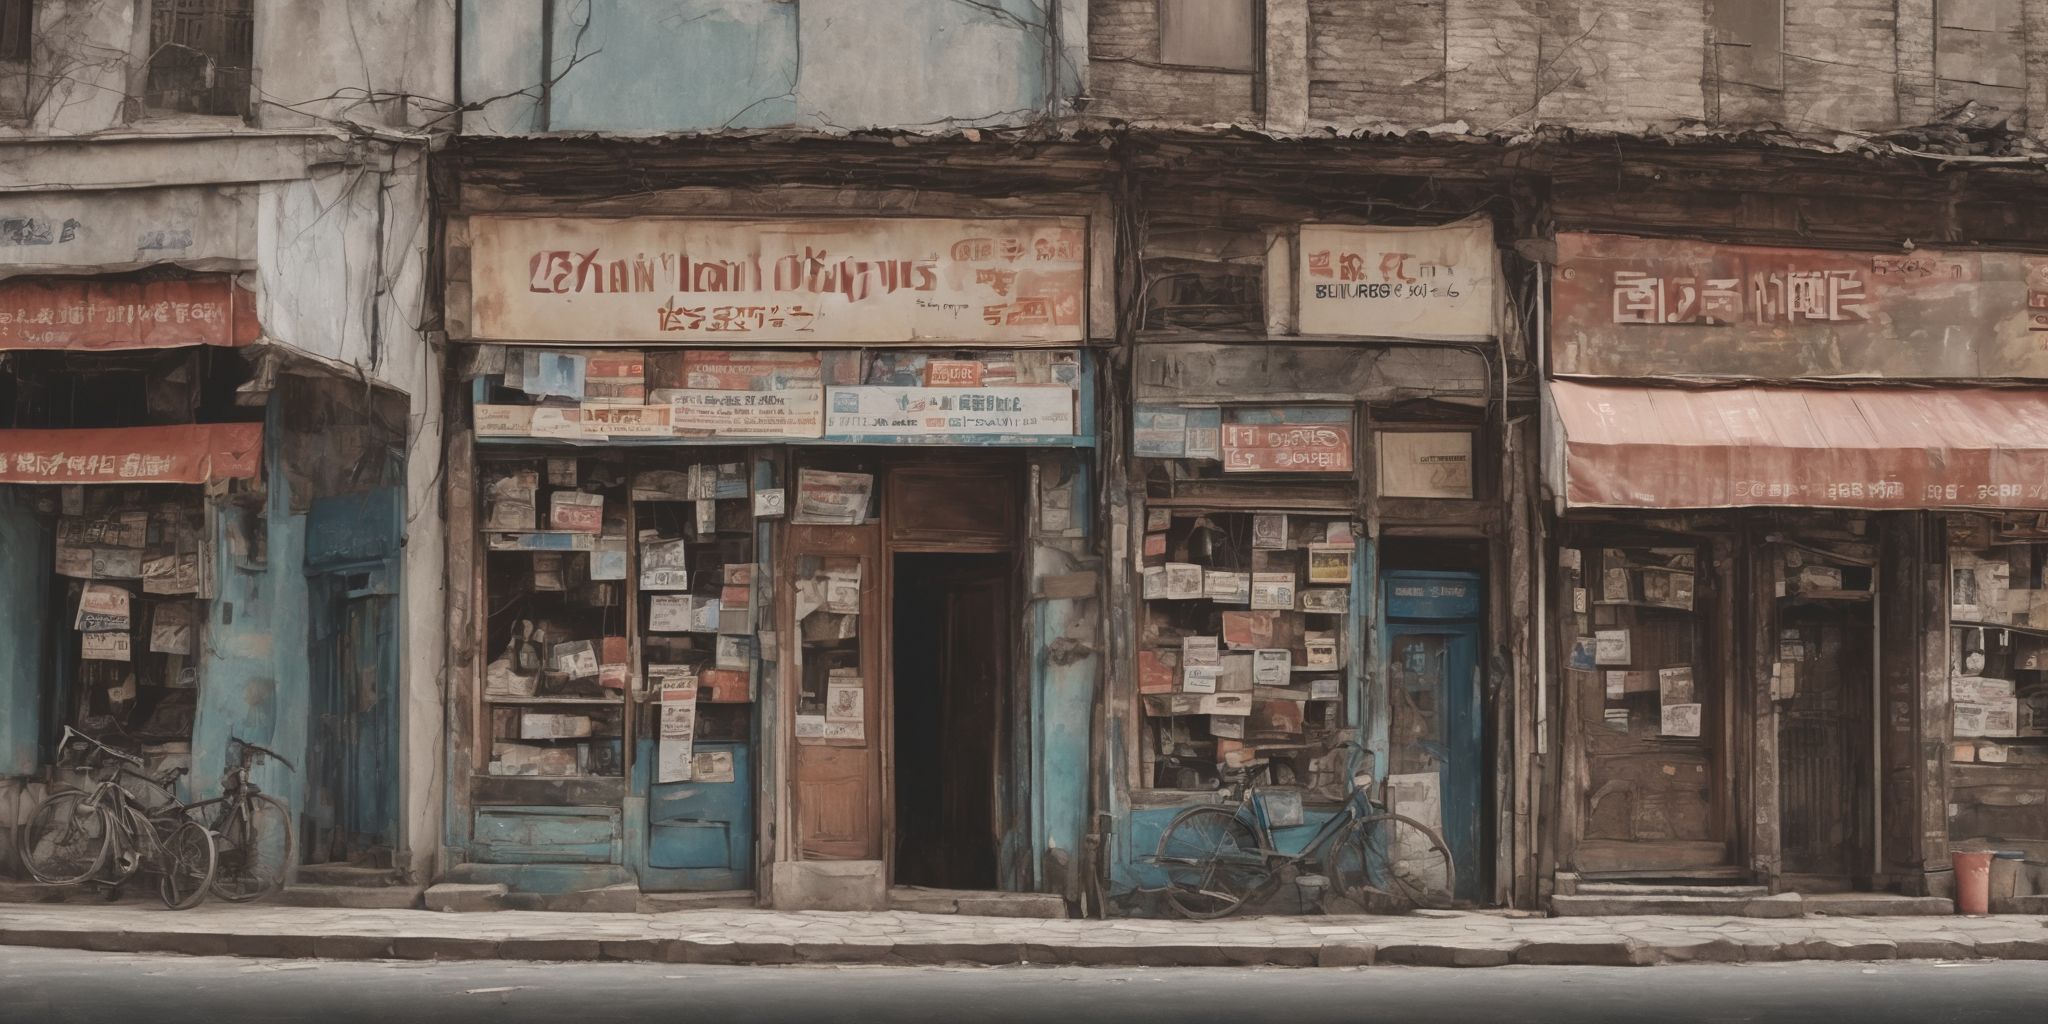 Loan shops  in realistic, photographic style